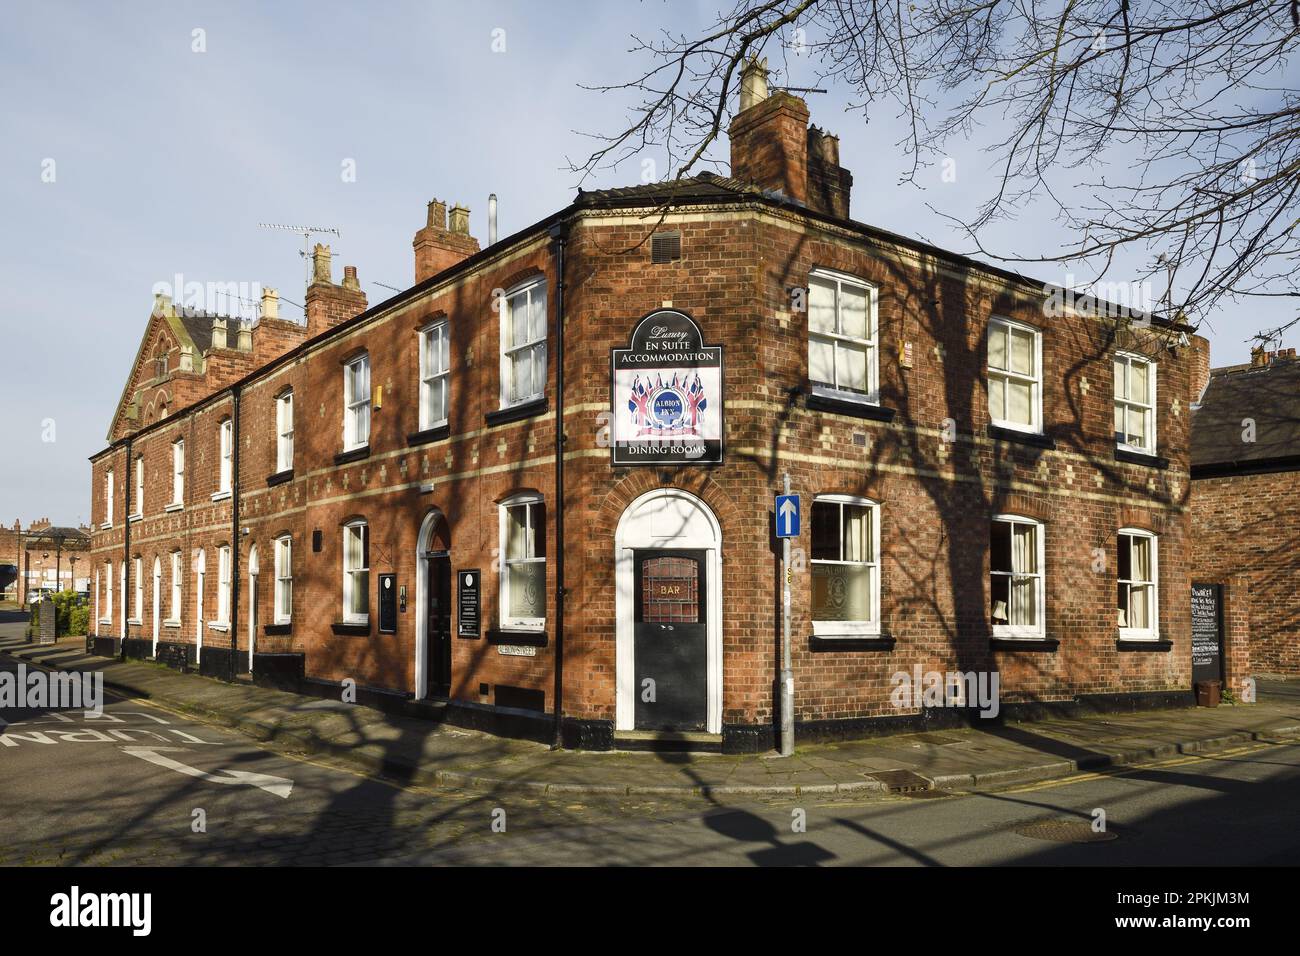 Exterior of the Albion pub on Albion Street Chester city centre UK Stock Photo